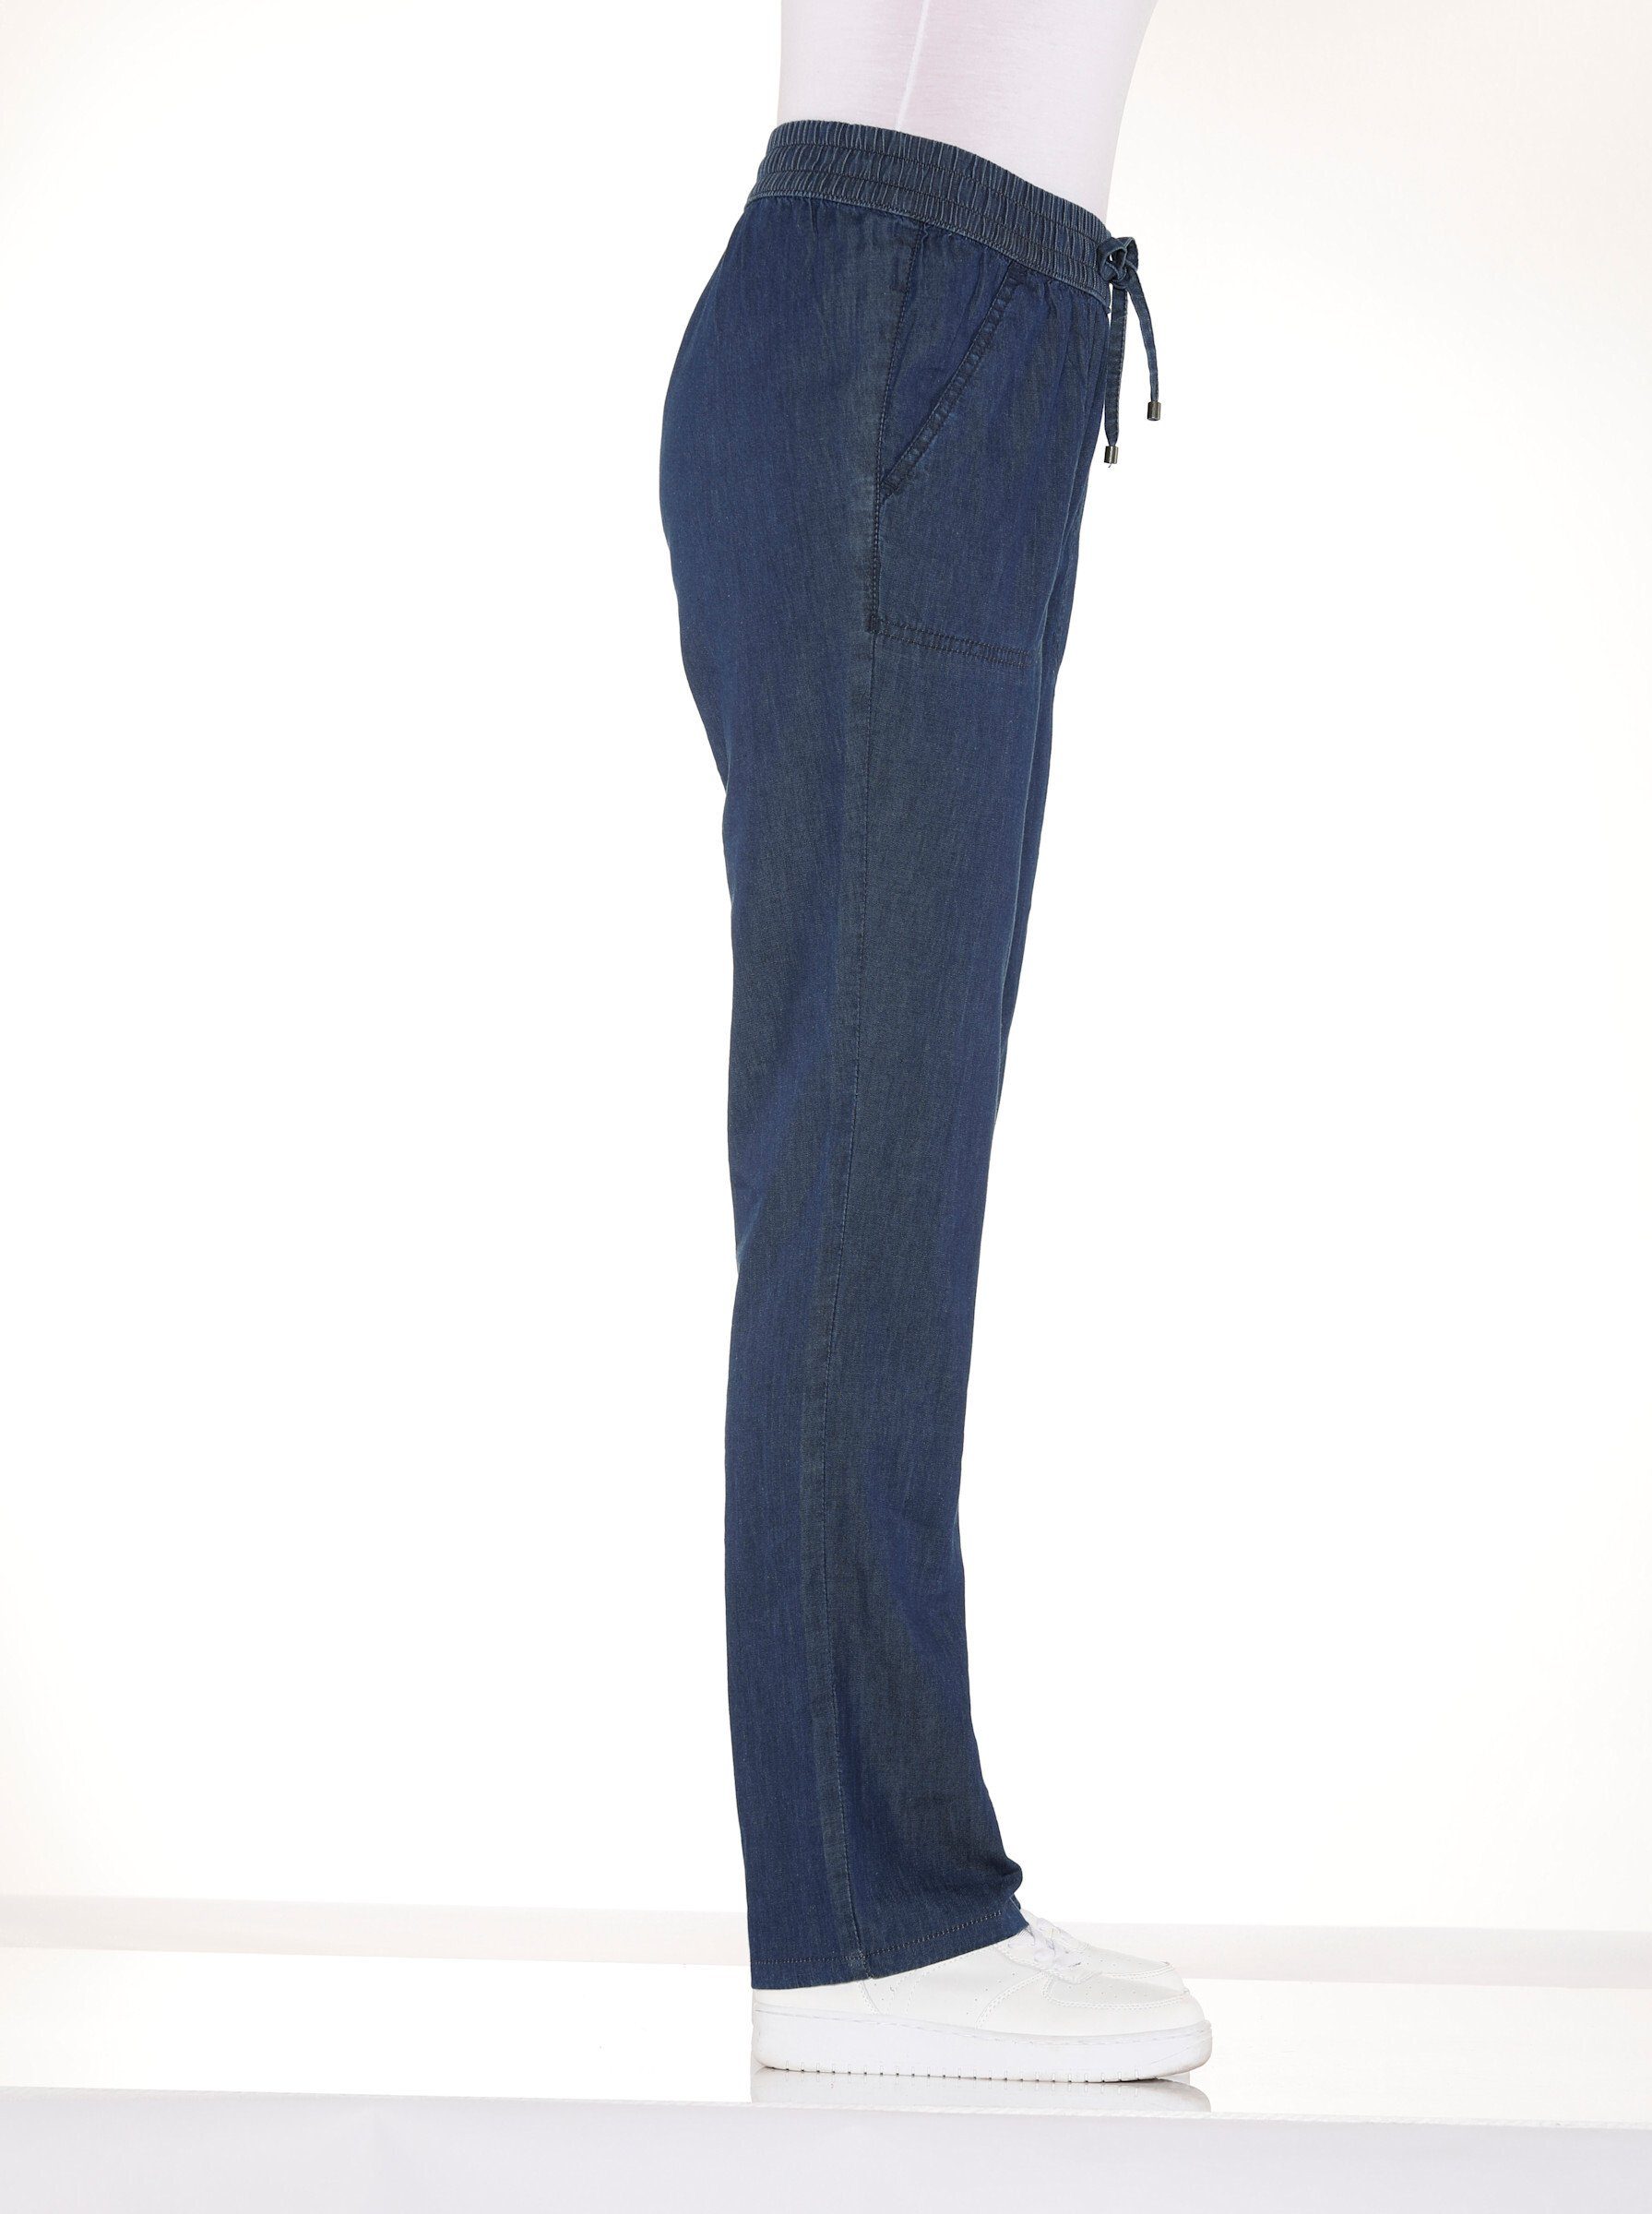 Sieh an! Bequeme blue-stone-washed Jeans